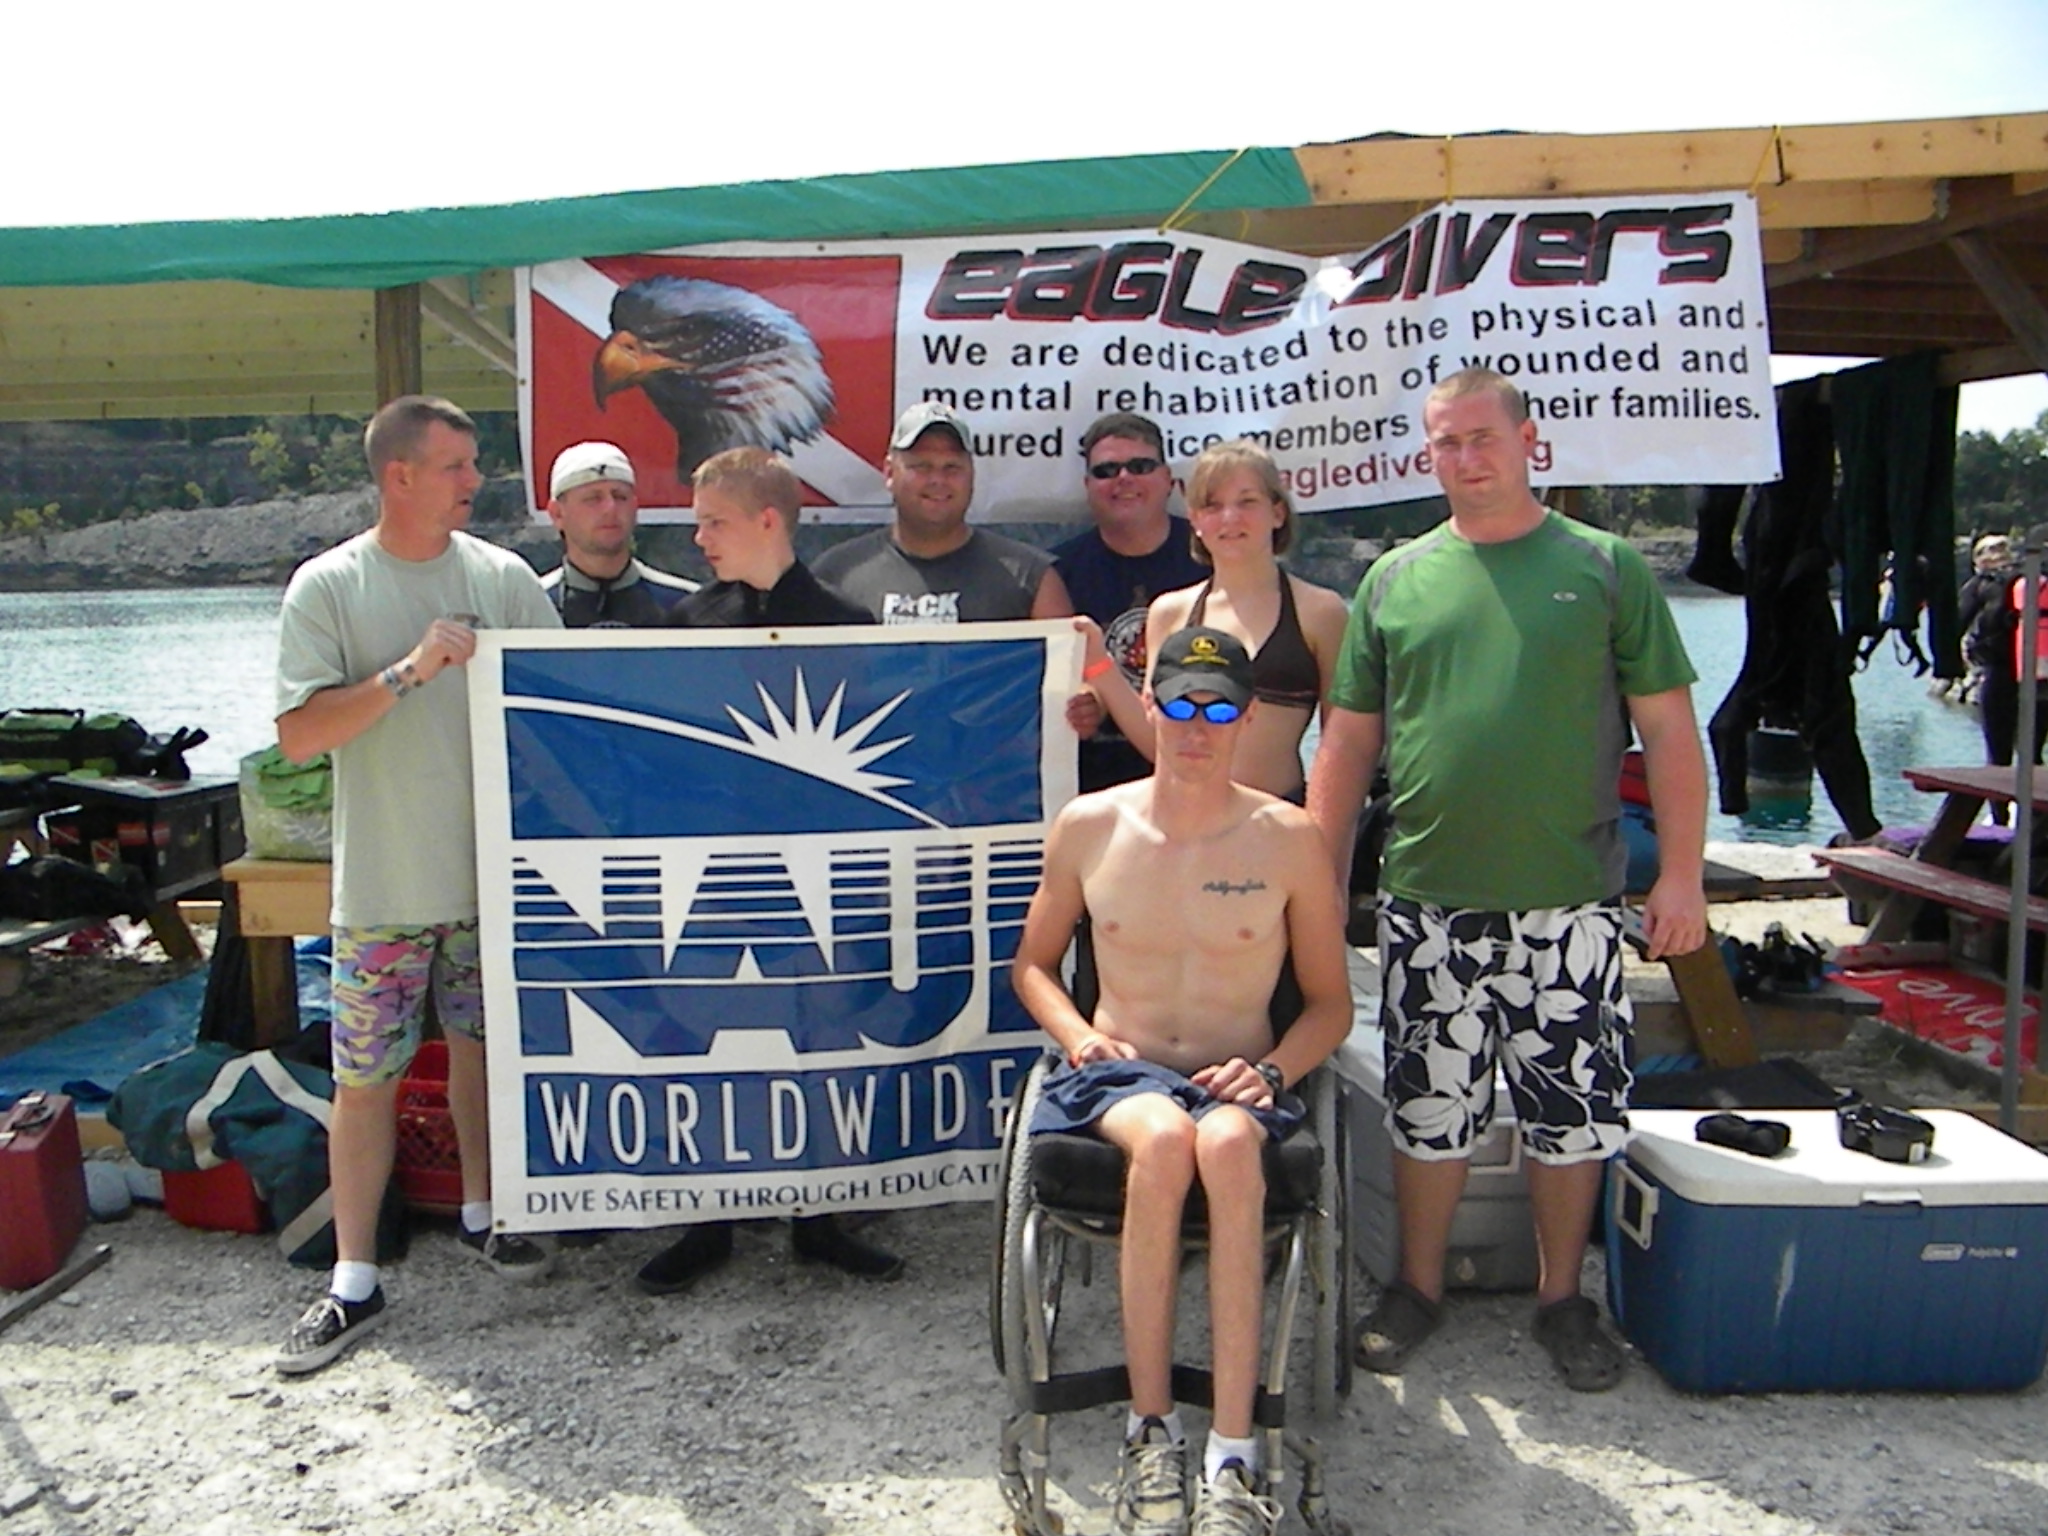 New Divers for the Eagle Divers Org.